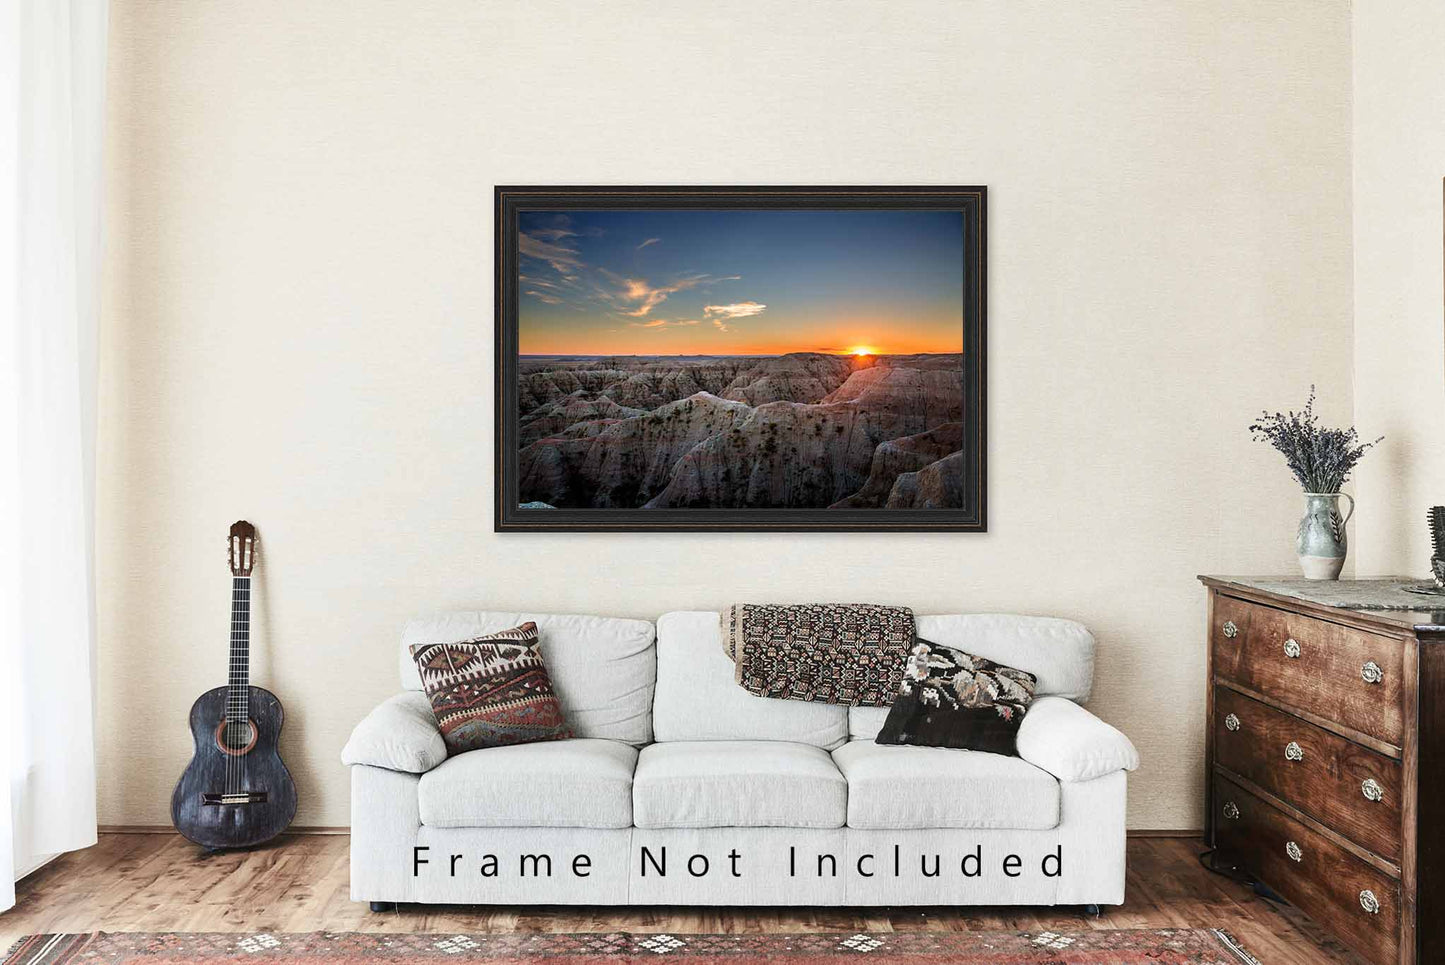 Western Wall Art Photography Print - Picture of Sunset Over Badlands in South Dakota Scenic Landscape Decor 4x6 to 40x60